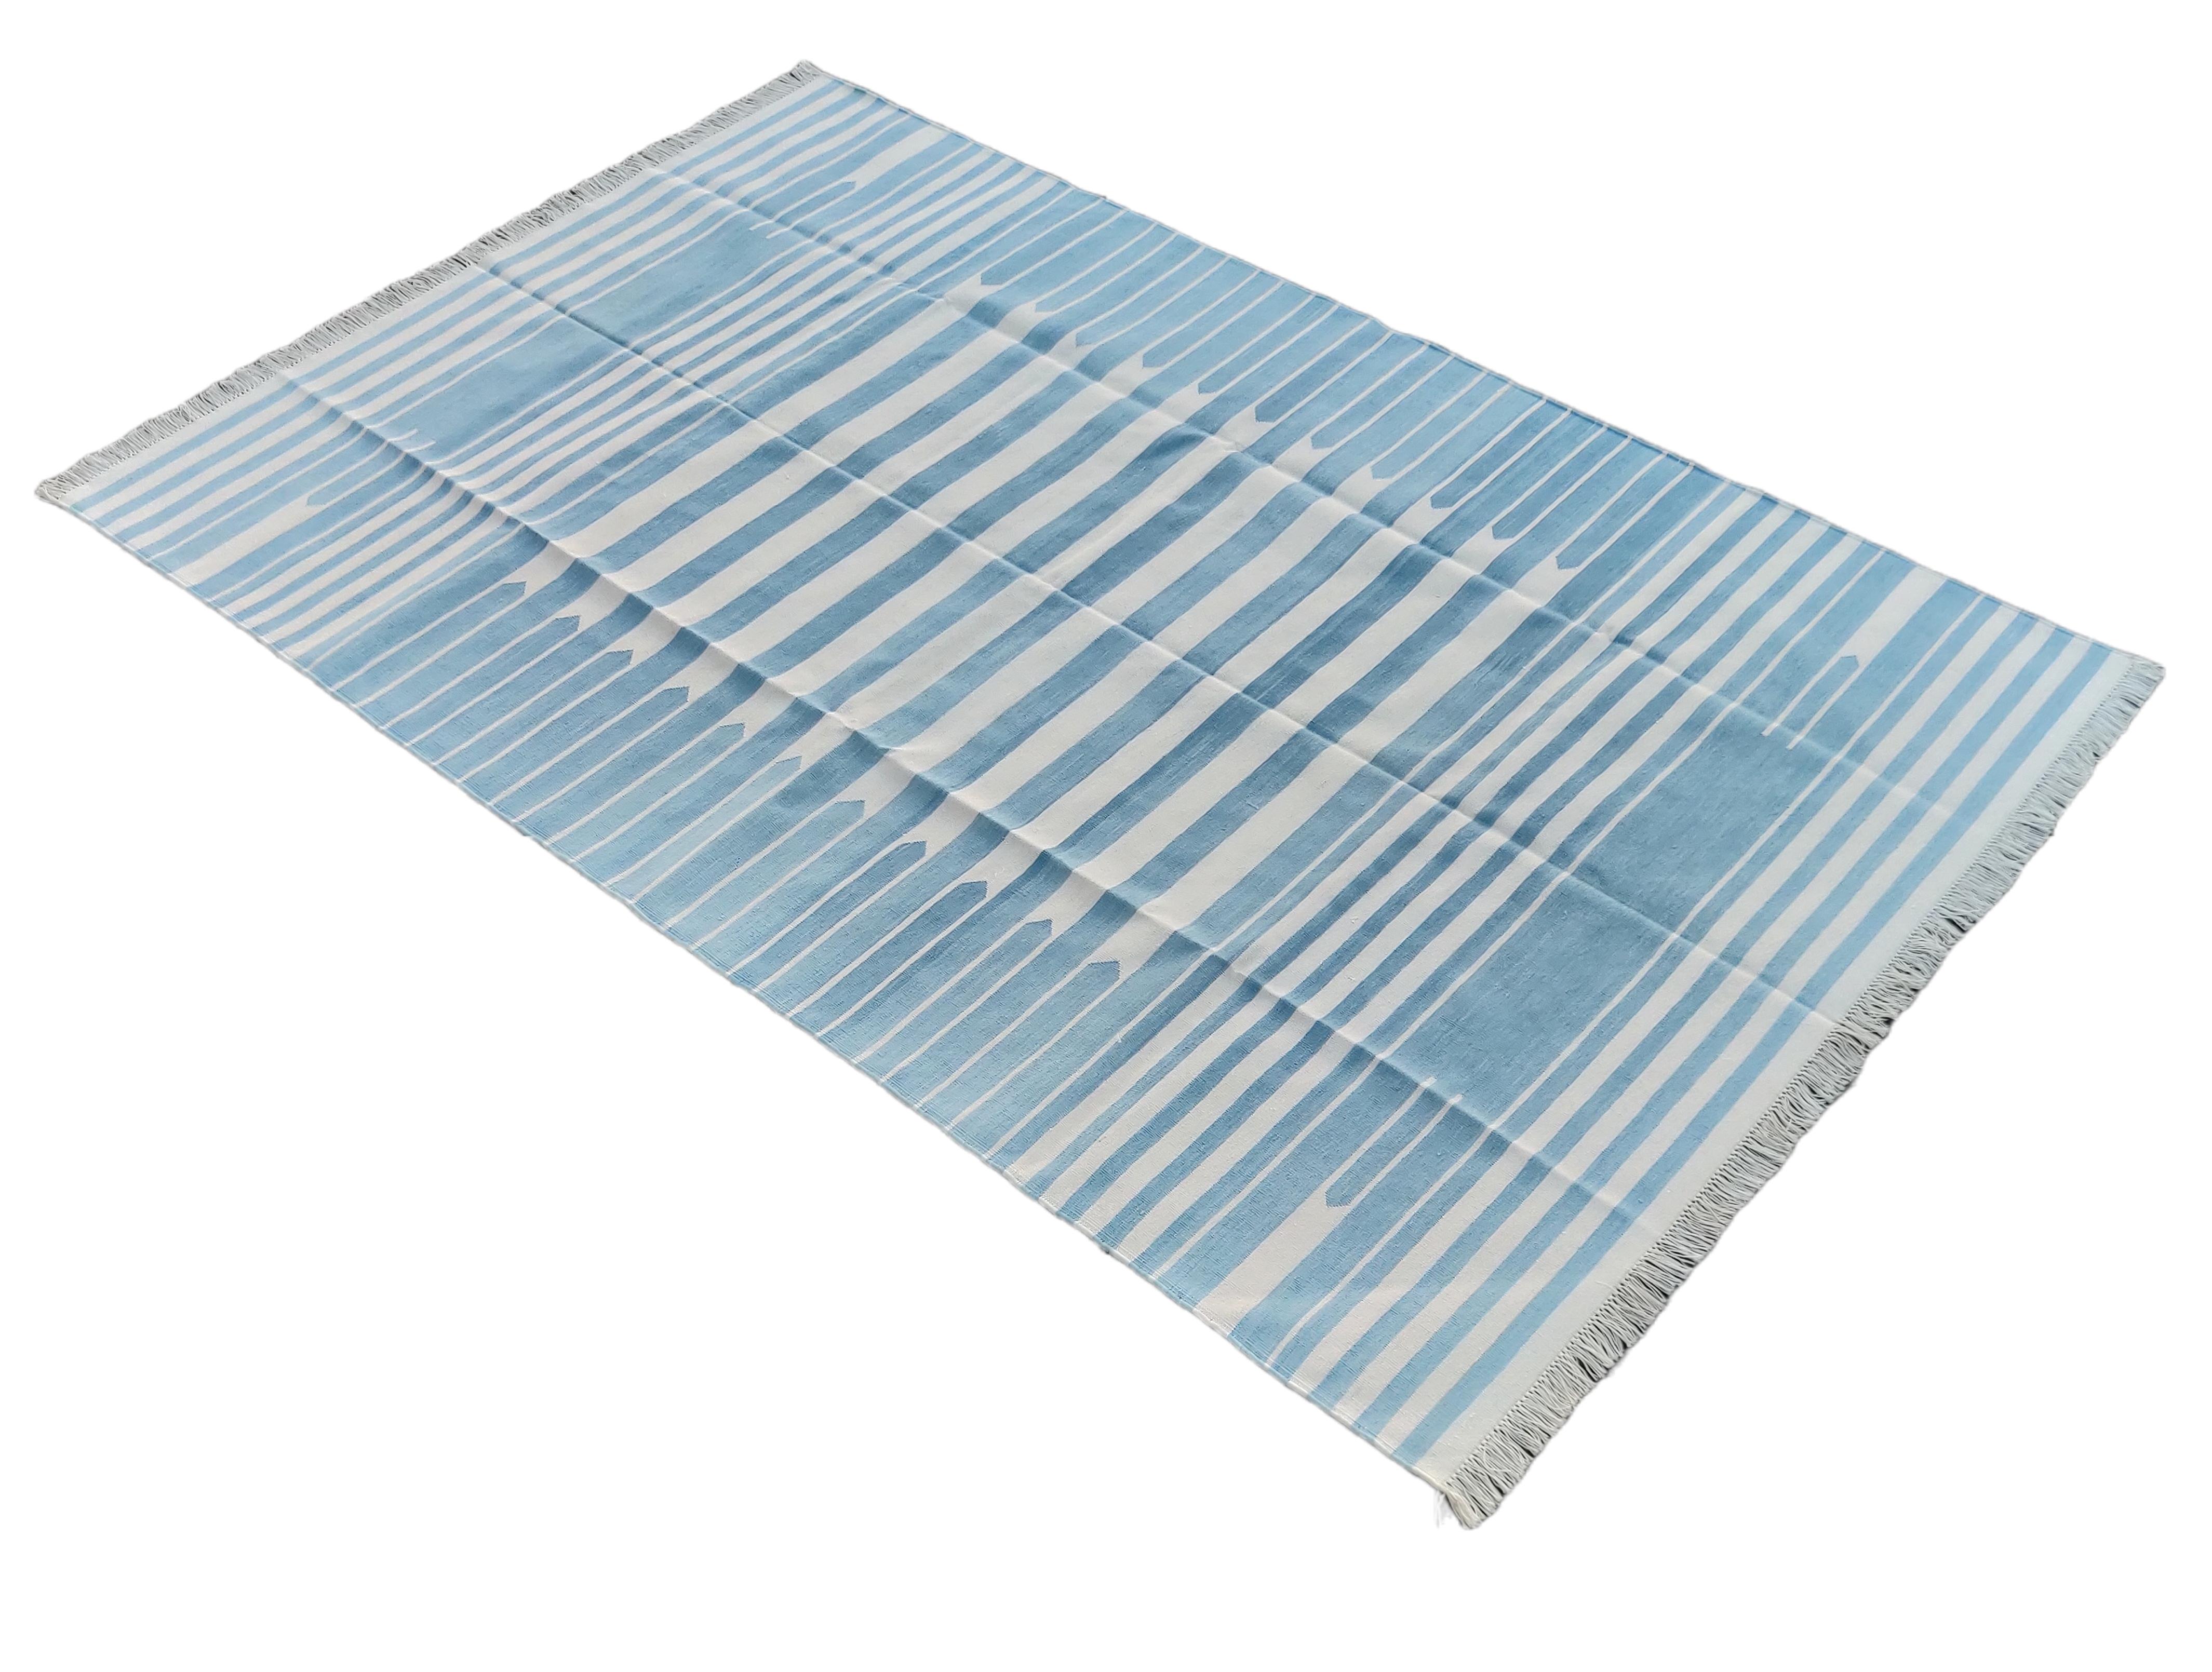 Cotton Vegetable Dyed Blue And White Striped Indian Dhurrie Rug-5'x8' 
These special flat-weave dhurries are hand-woven with 15 ply 100% cotton yarn. Due to the special manufacturing techniques used to create our rugs, the size and color of each